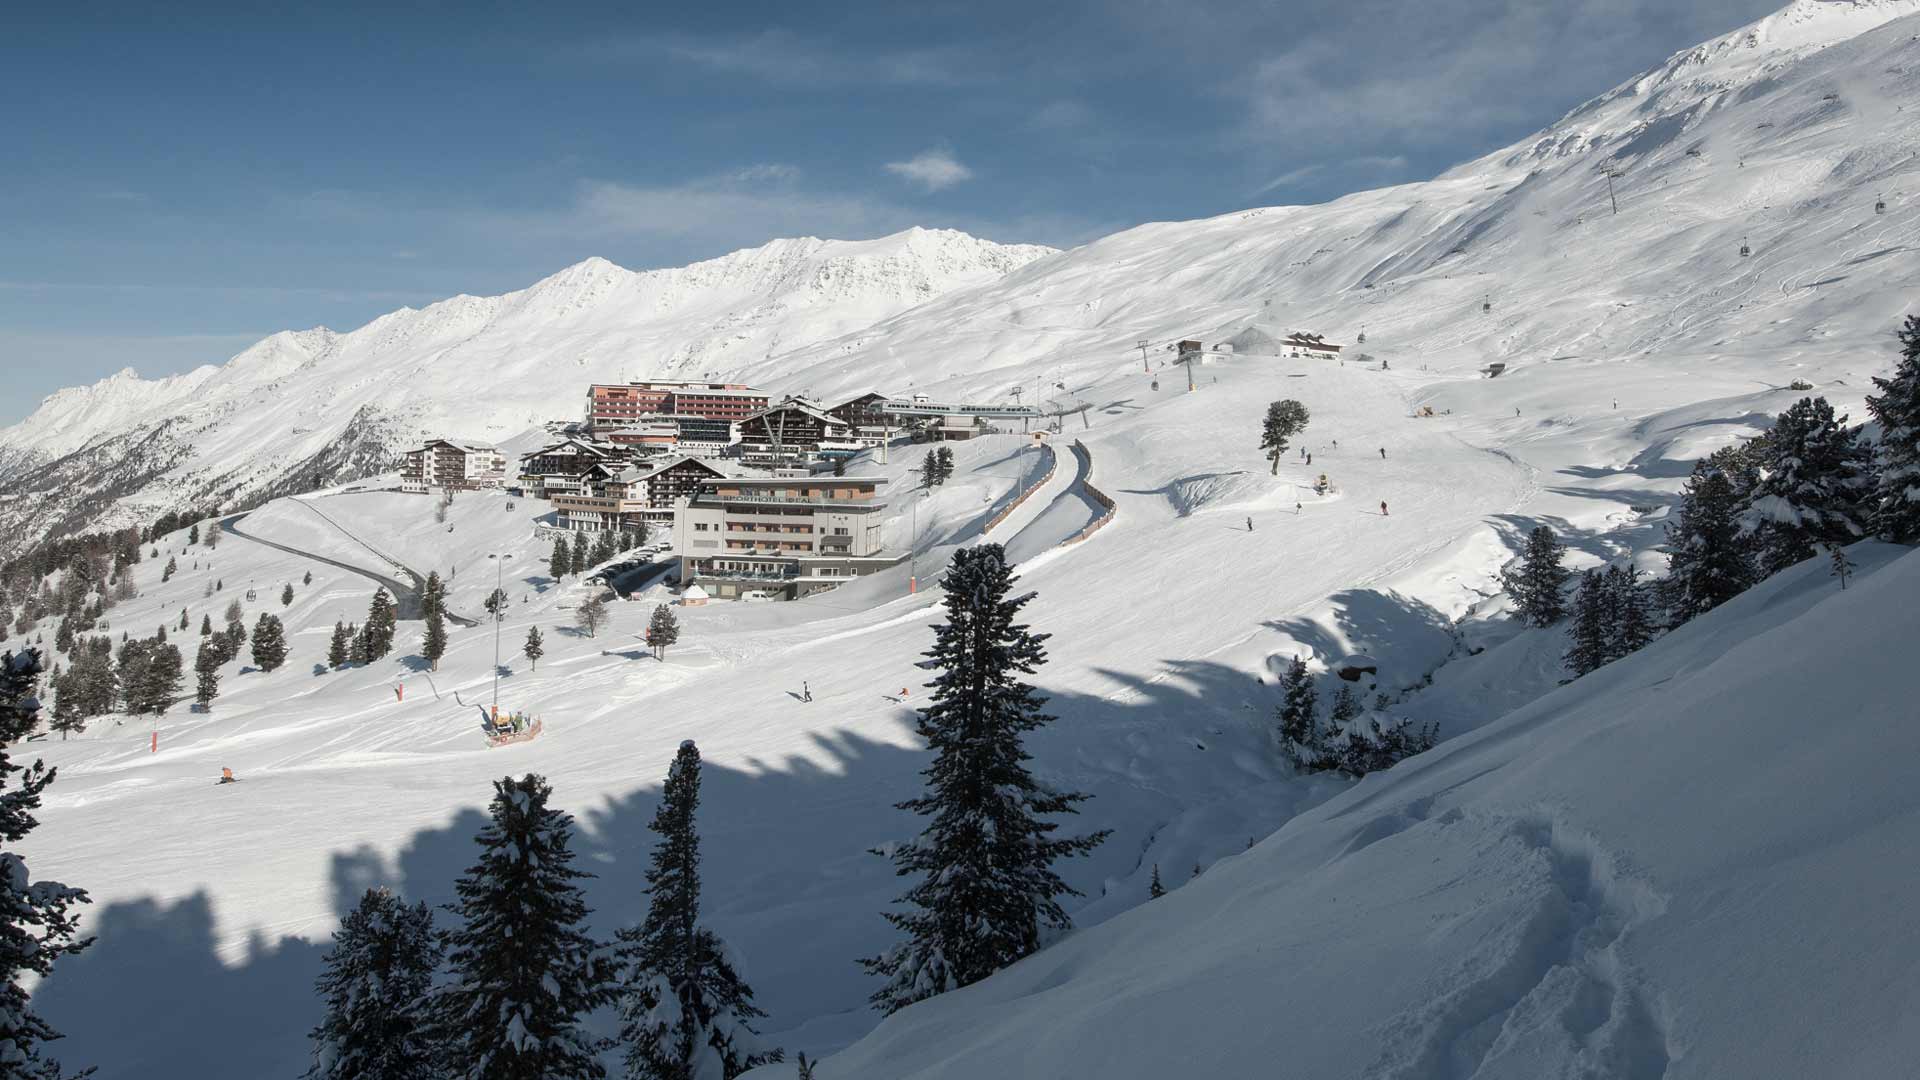 Our hotel is positioned at 2150m above sea level on slope #33 in Hochgurgl.